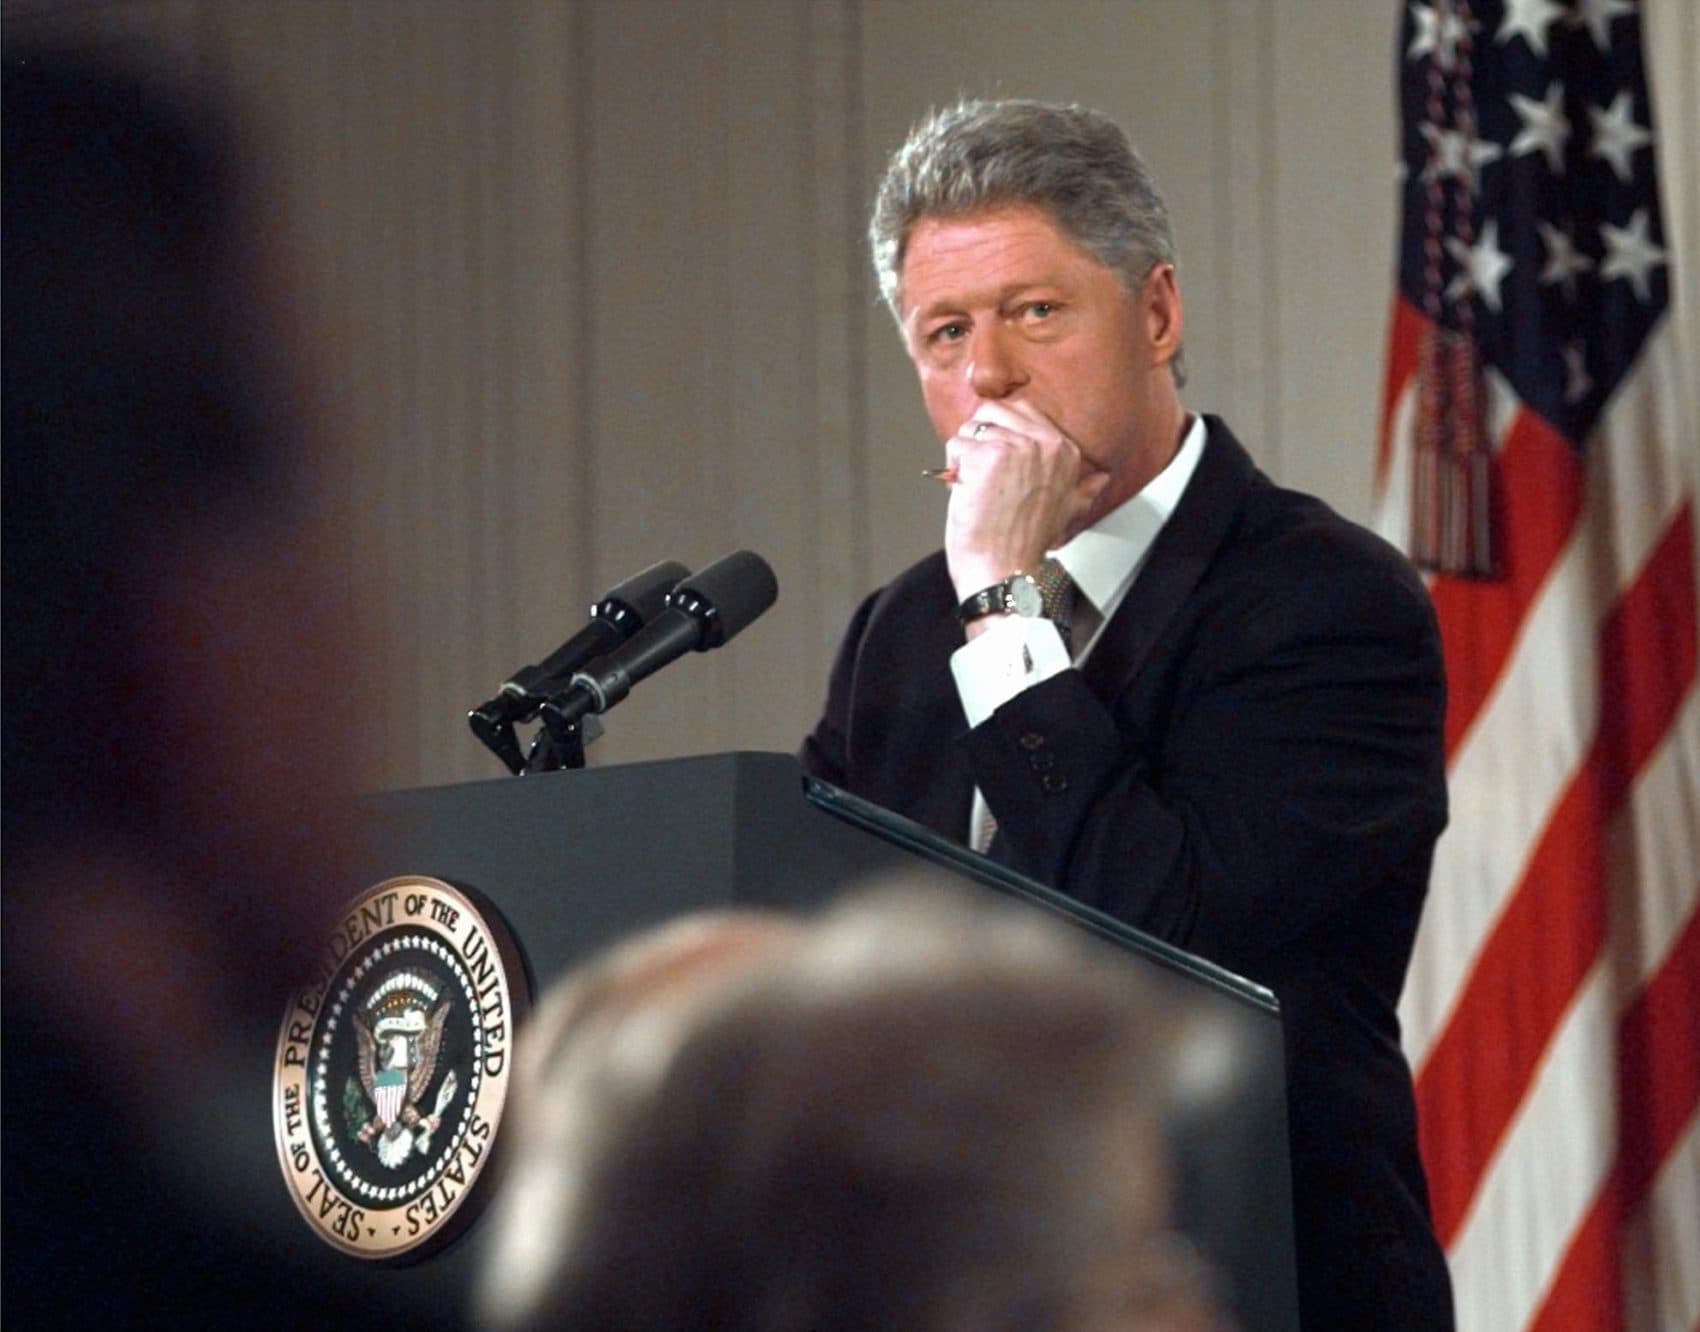 President Clinton ponders a question during his news conference in the East Room of the White House Thursday April 30, 1998. (Ron Edmonds/AP)